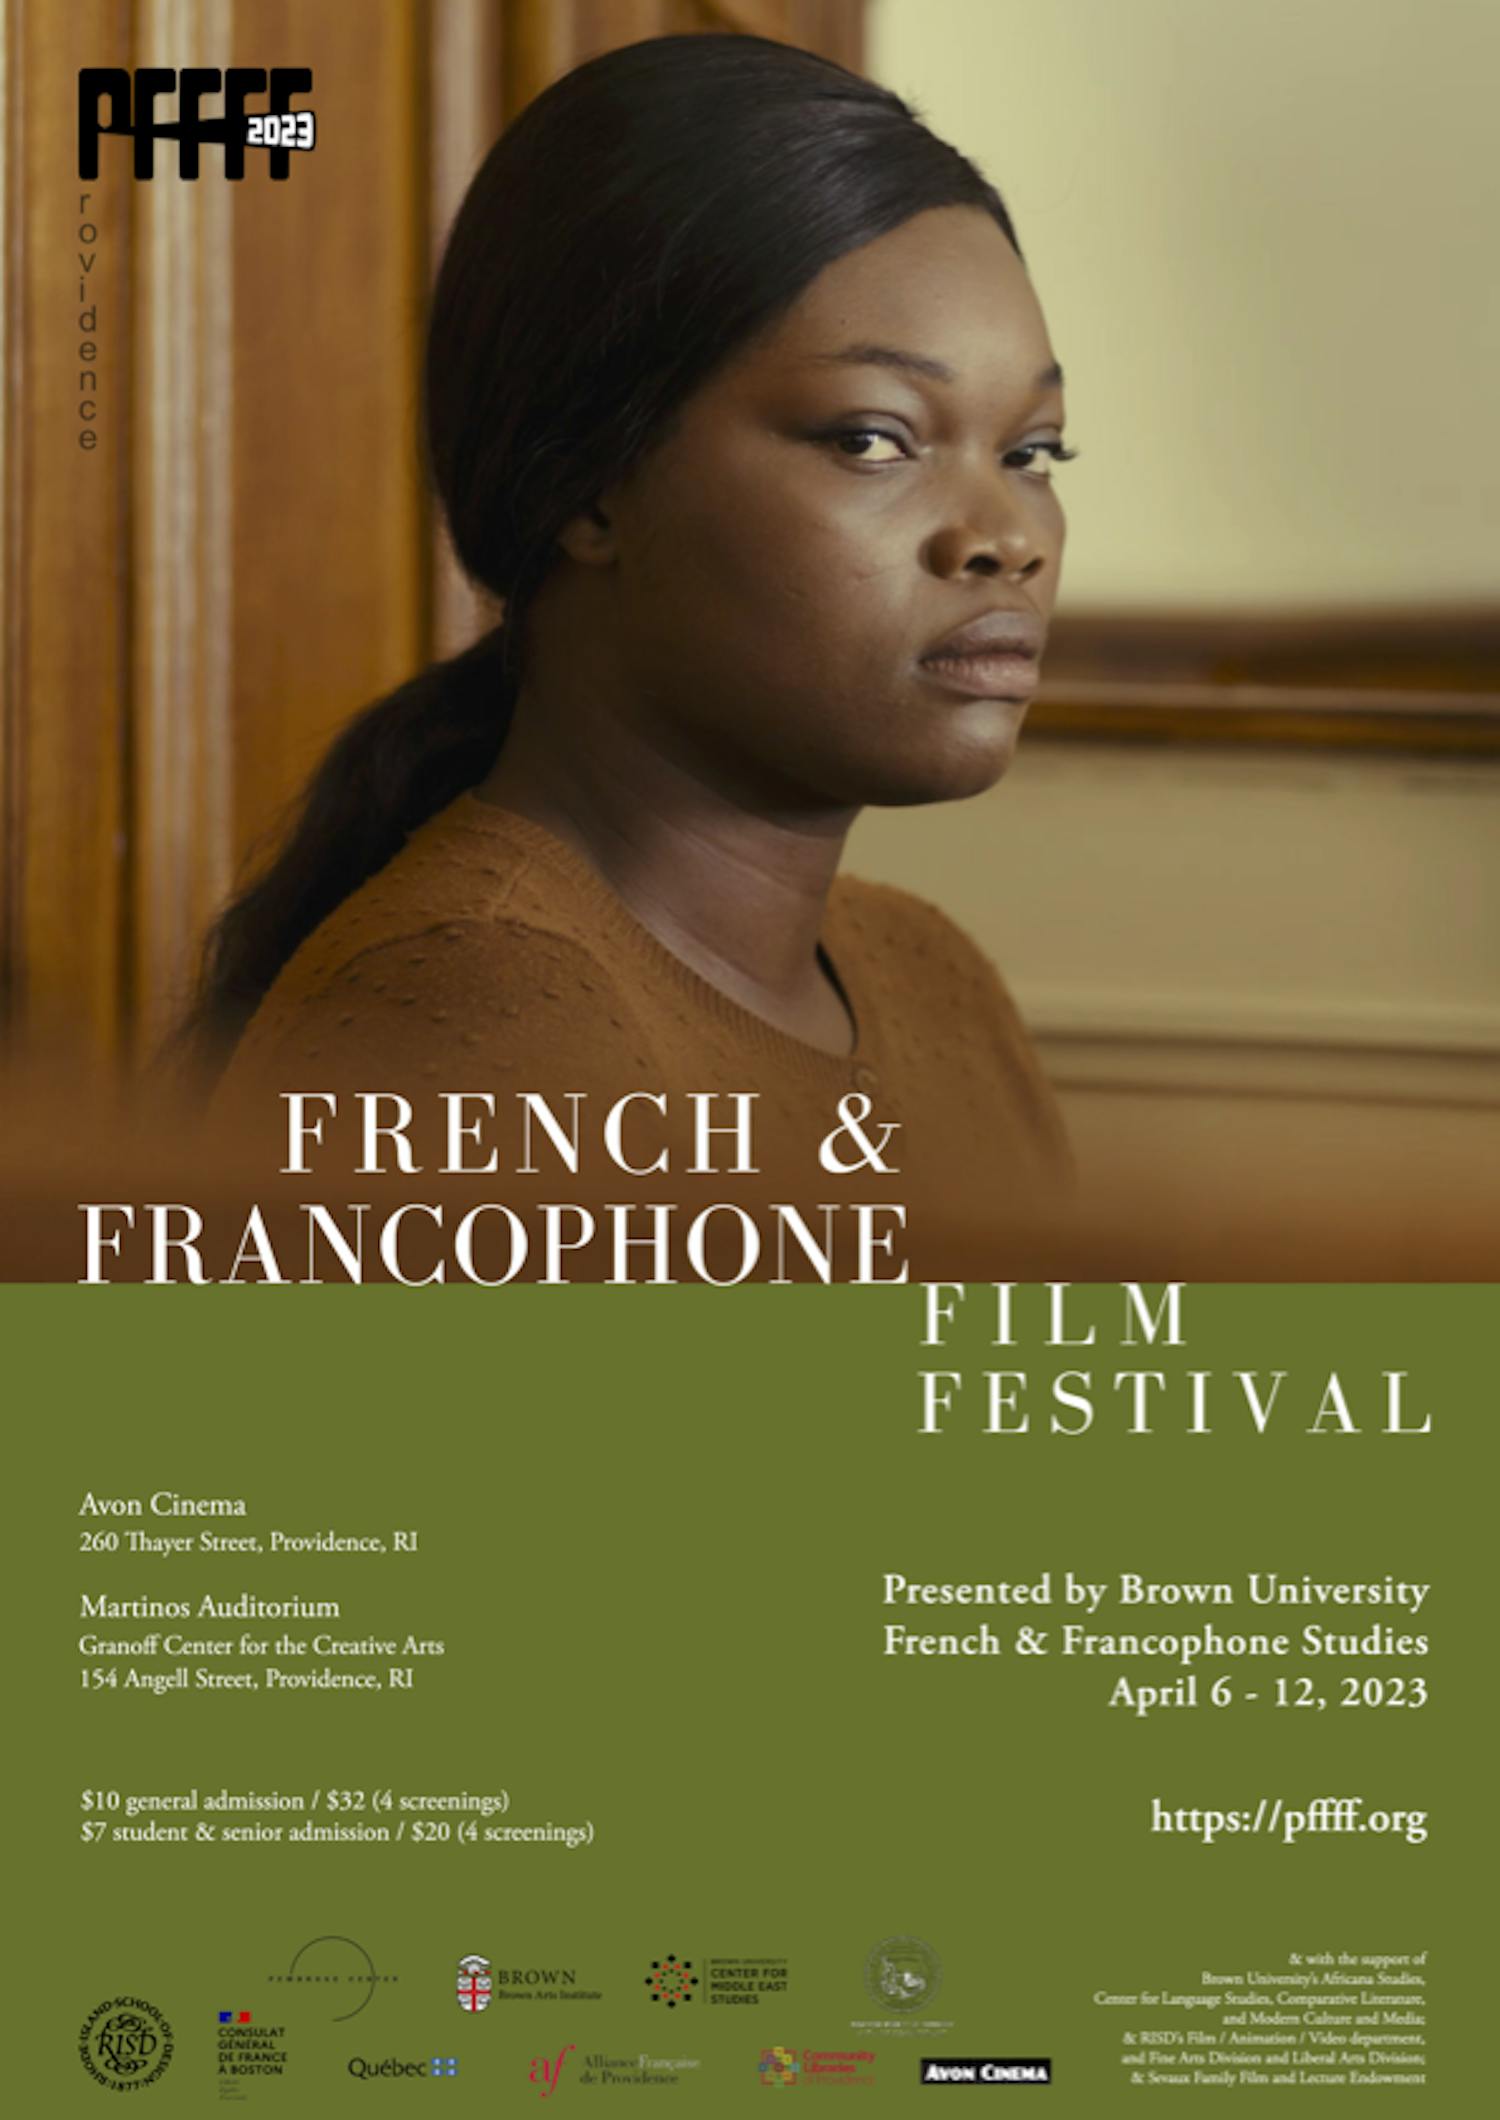 kennedy_french film_co_brown university french & francophone studies.png